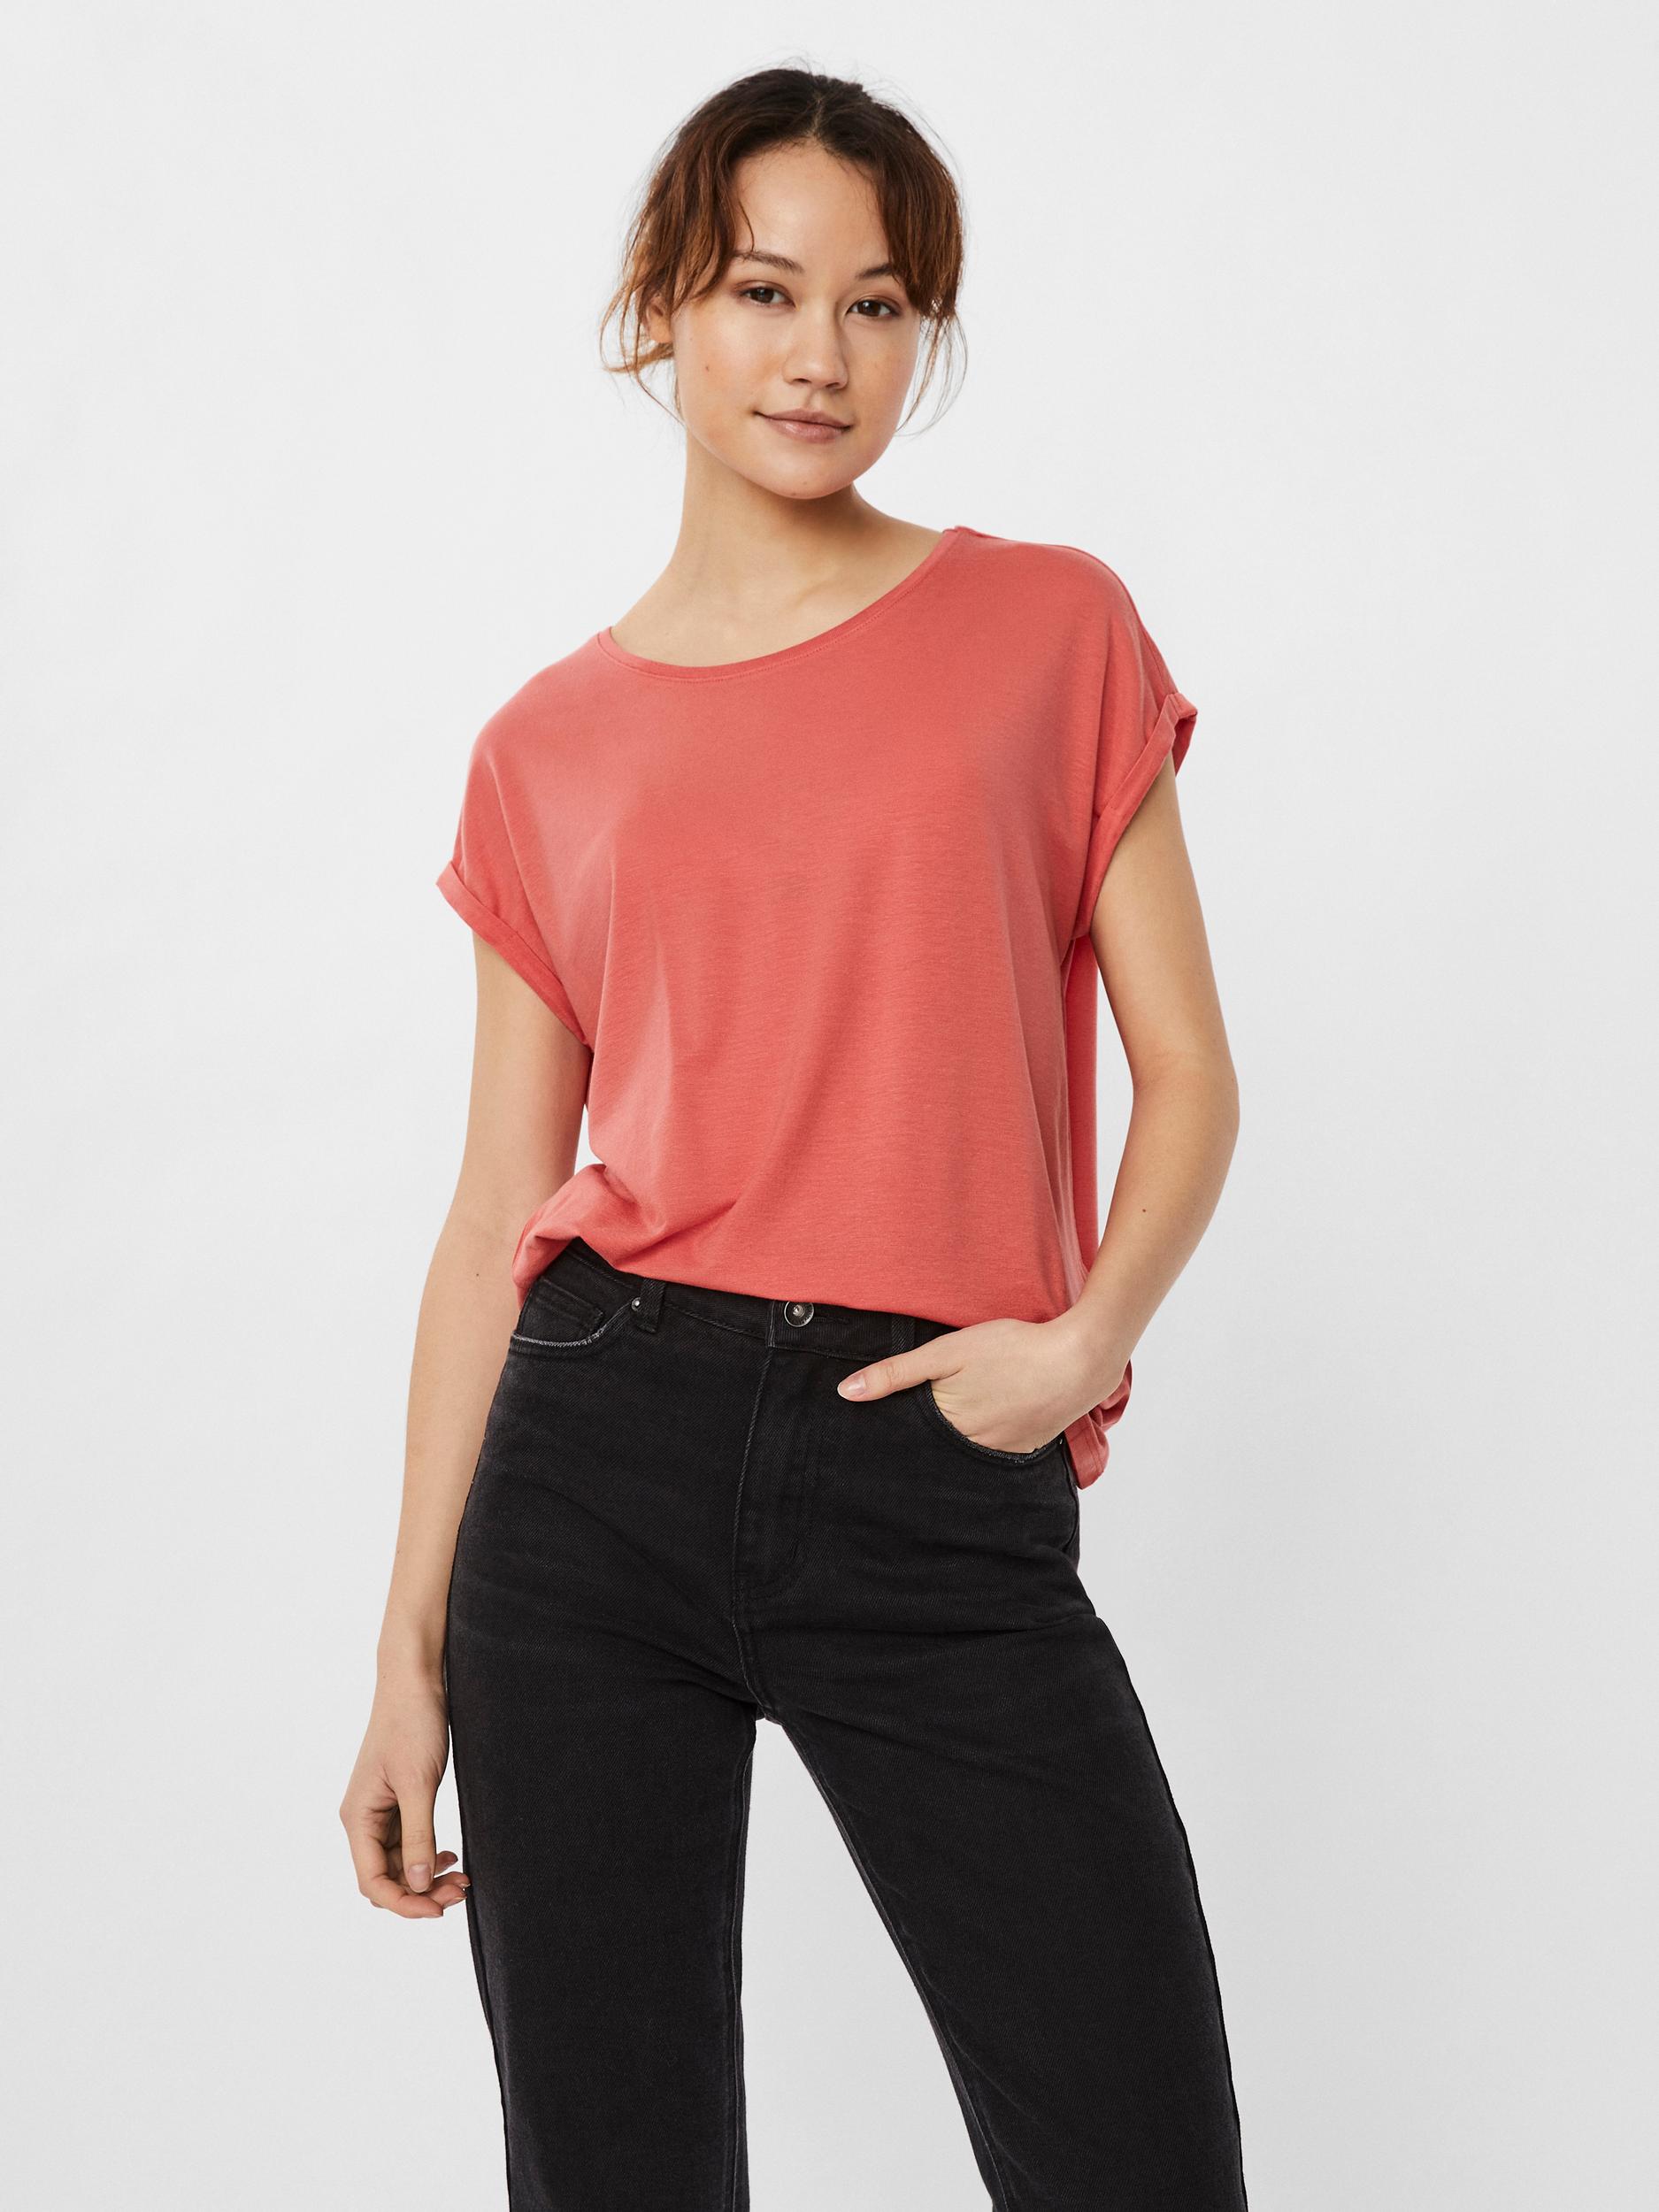 AWARE | Ava T-Shirt, SPICED CORAL, large